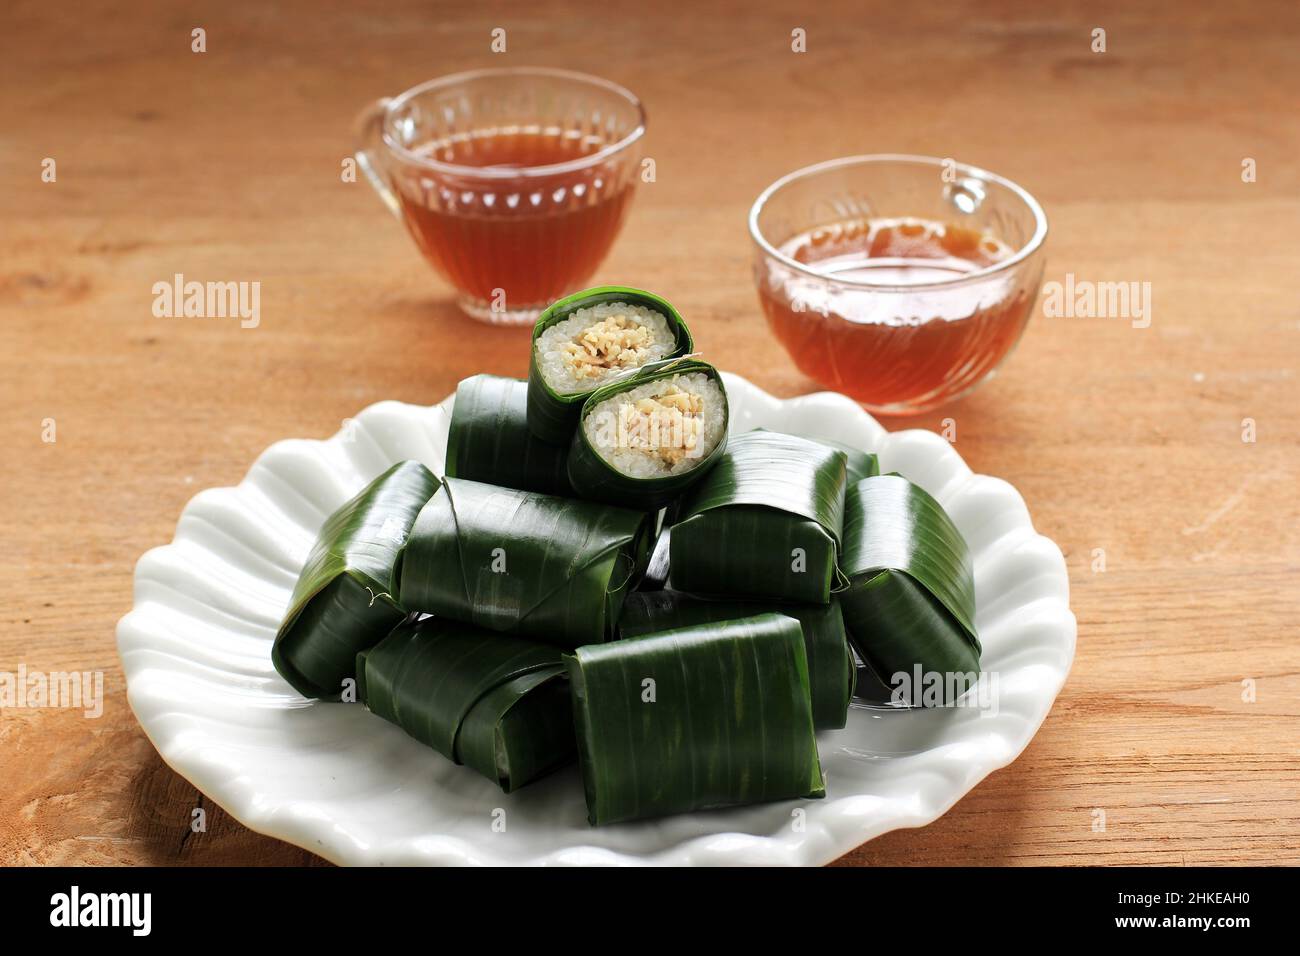 Lemper is Indonesian Traditional Dish Made from Glutinous or Sticky Rice, Steamed with Coconut Milk, with Chicken Floss Inside and Wrapped with Banana Stock Photo